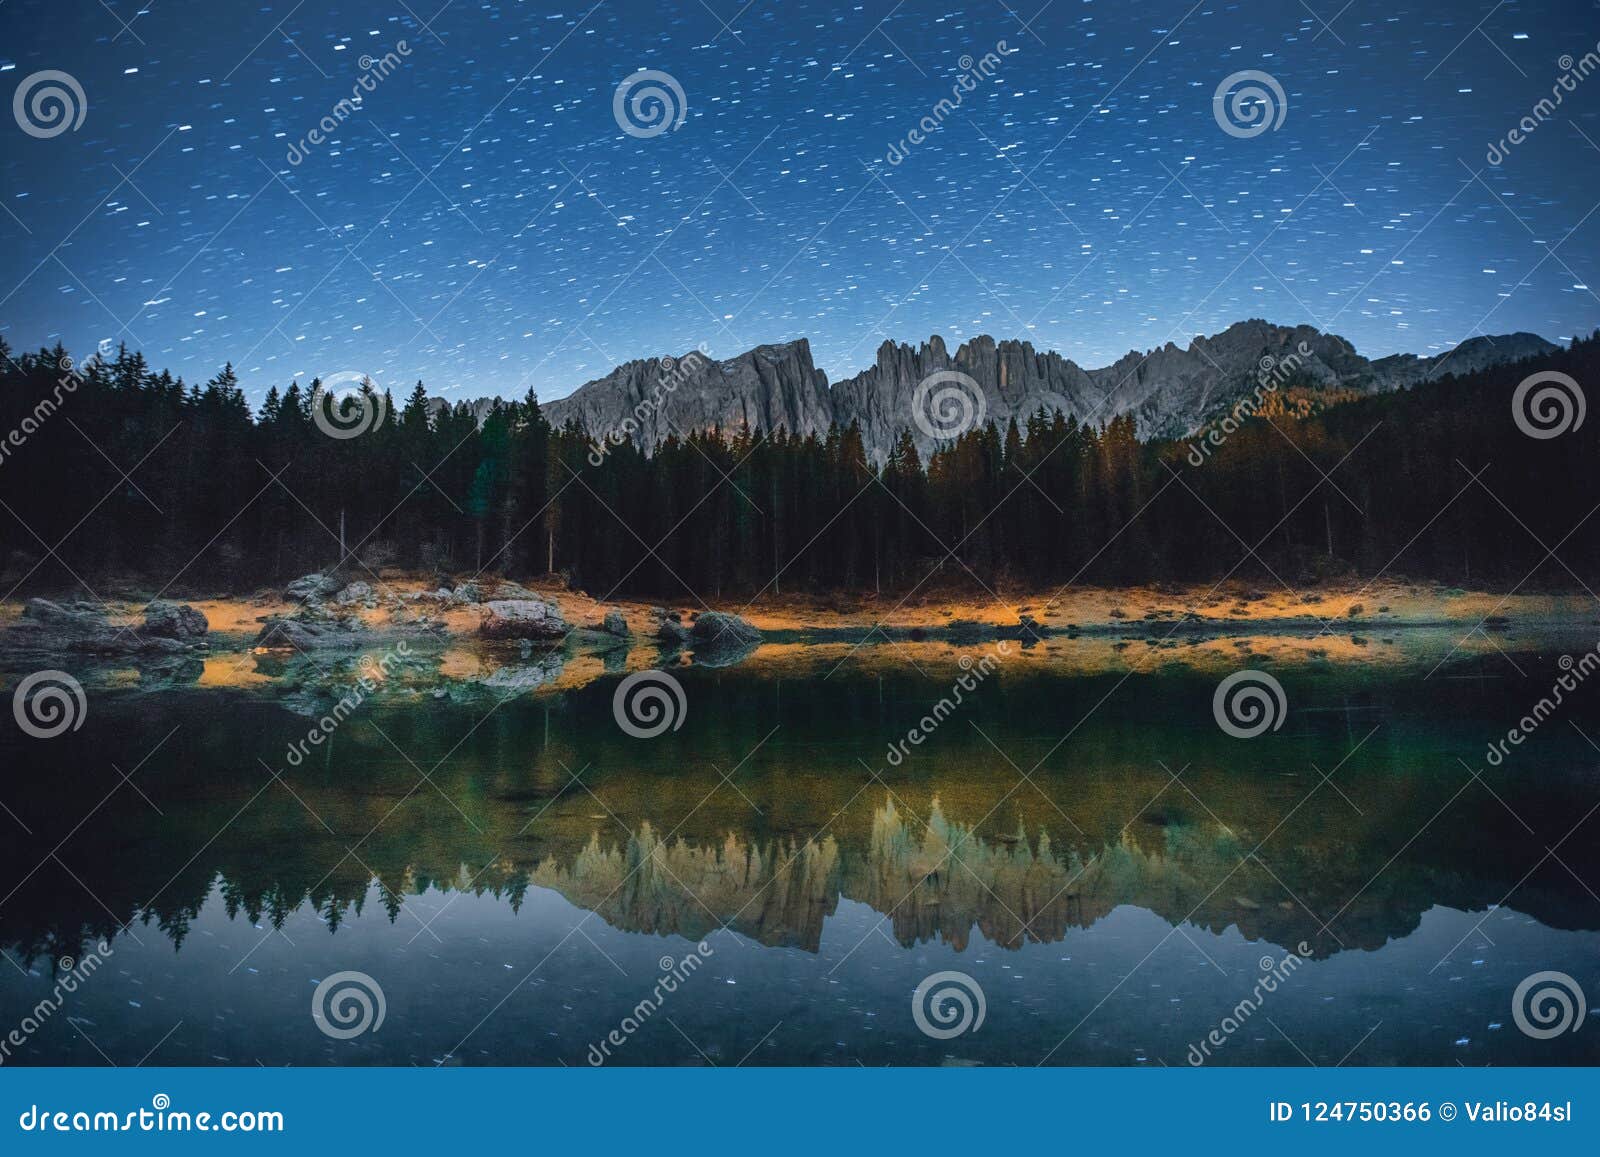 the karersee lake or lago di carezza with reflection of mountain